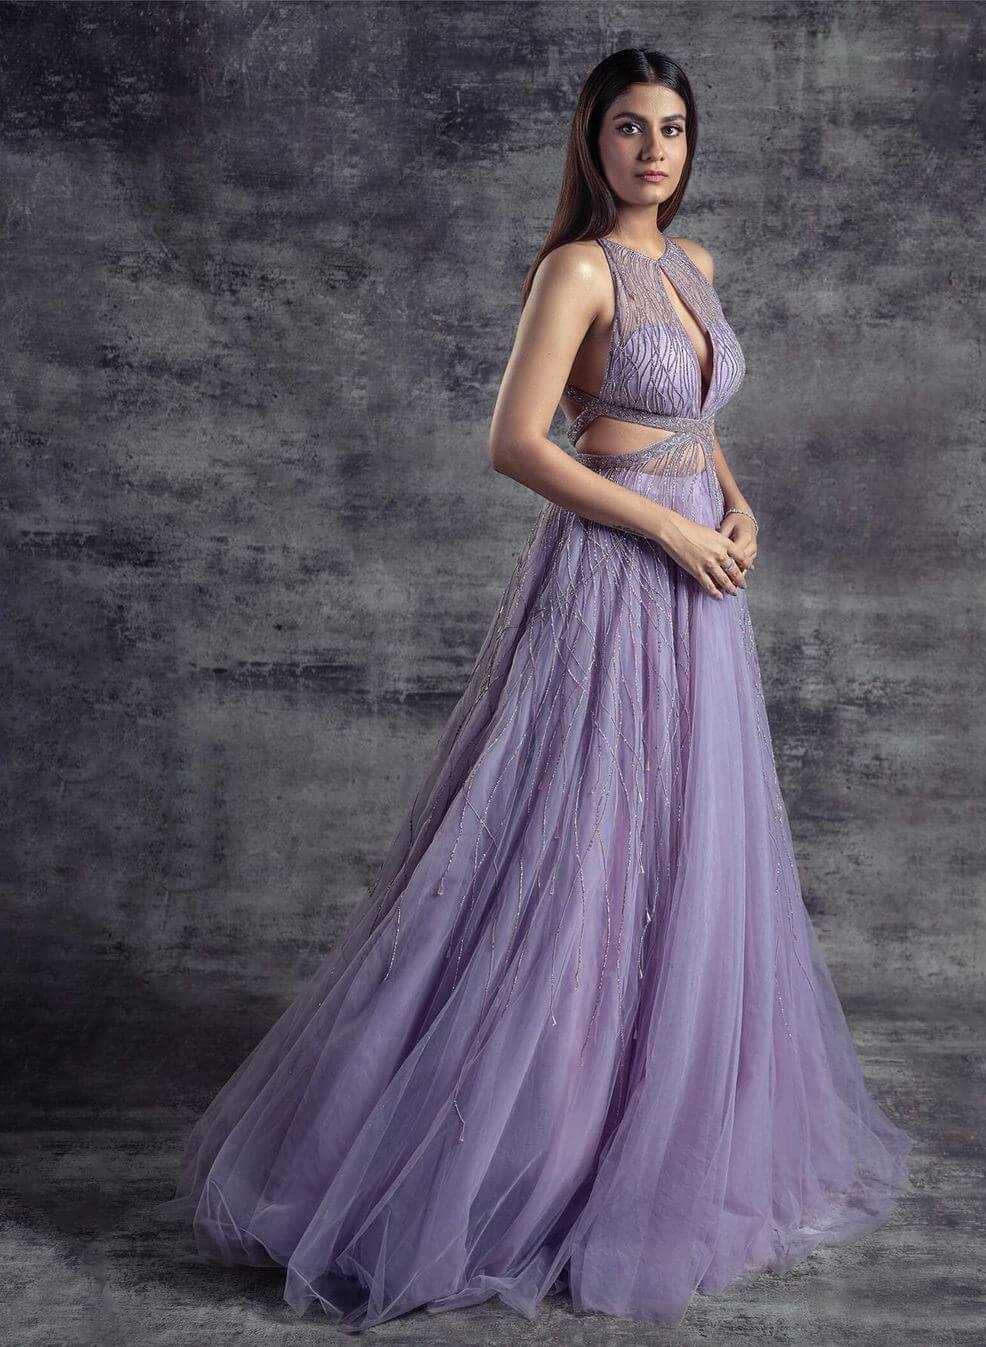 Shreya Dhanwanthary Look Beautiful In Purple Glittery Gown Outfit